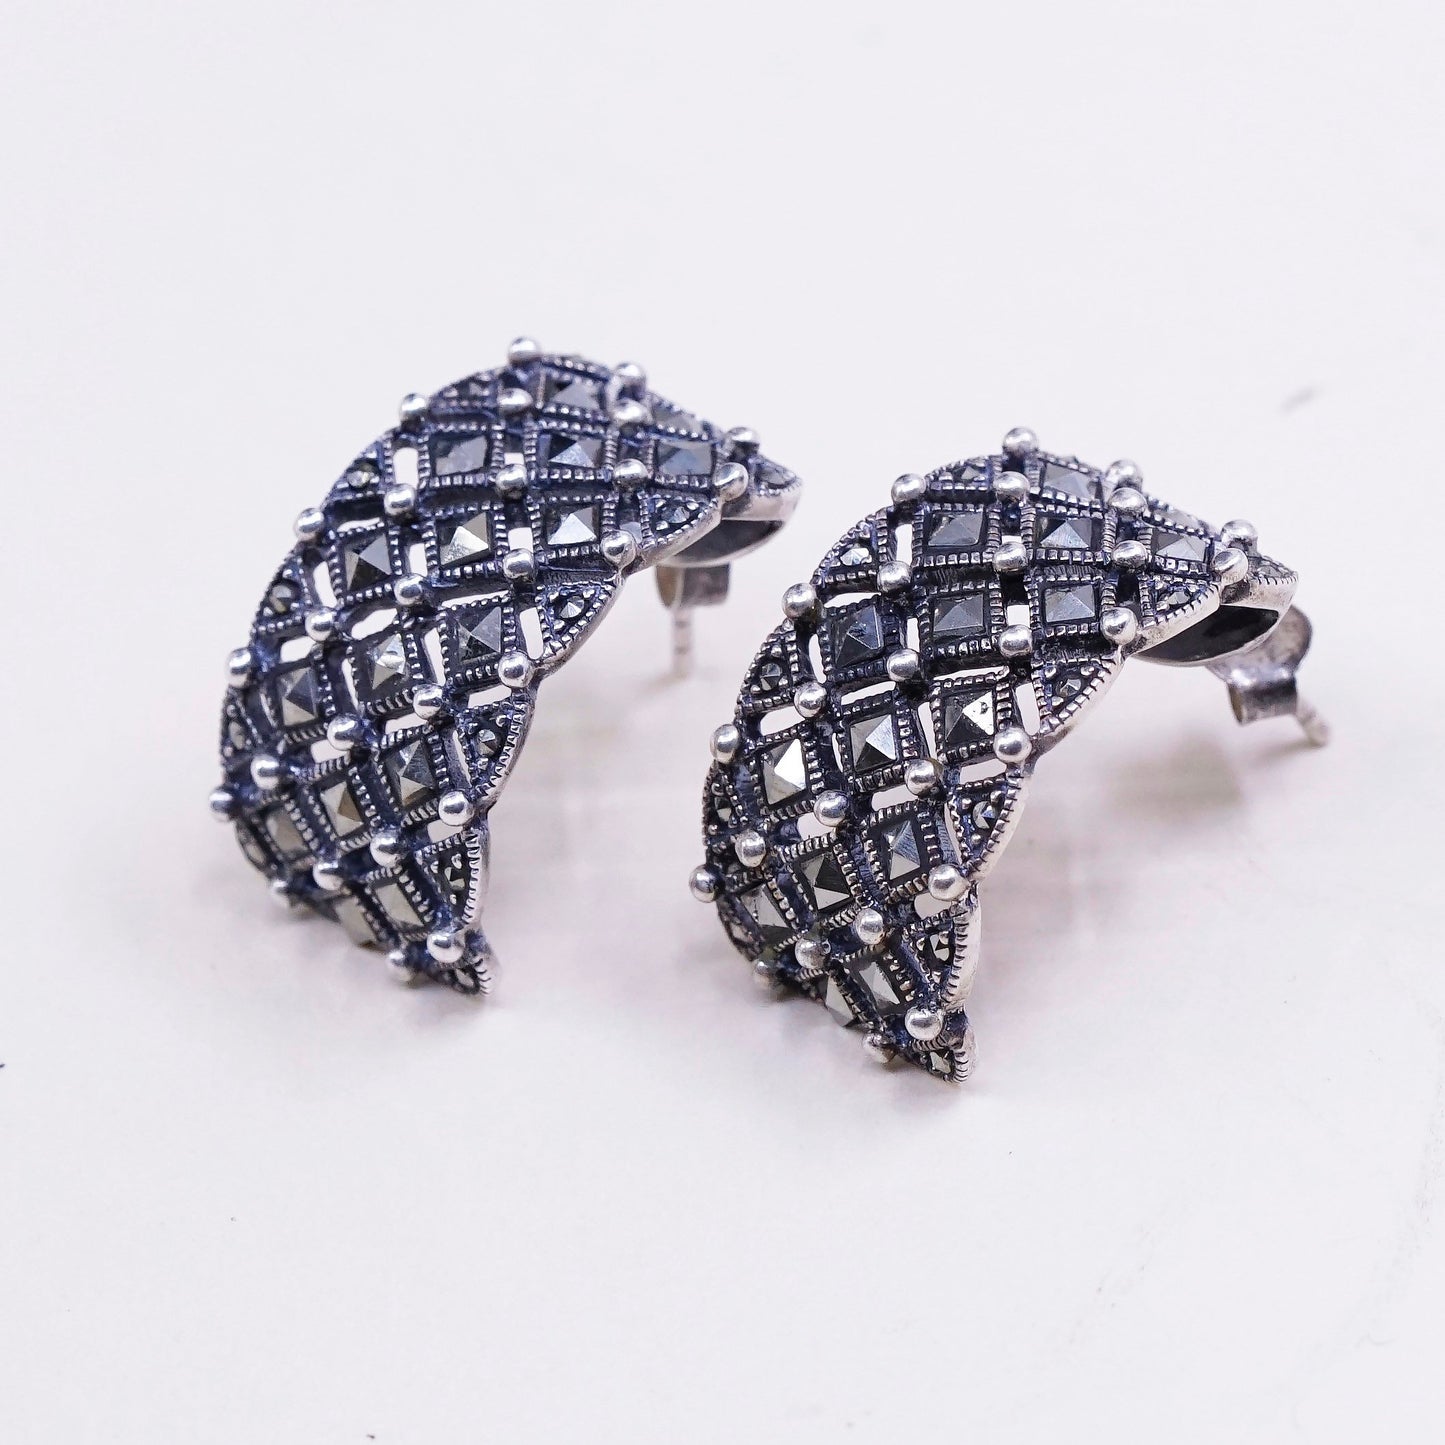 Vintage Sterling silver handmade earrings, solid 925 studs with marcasite